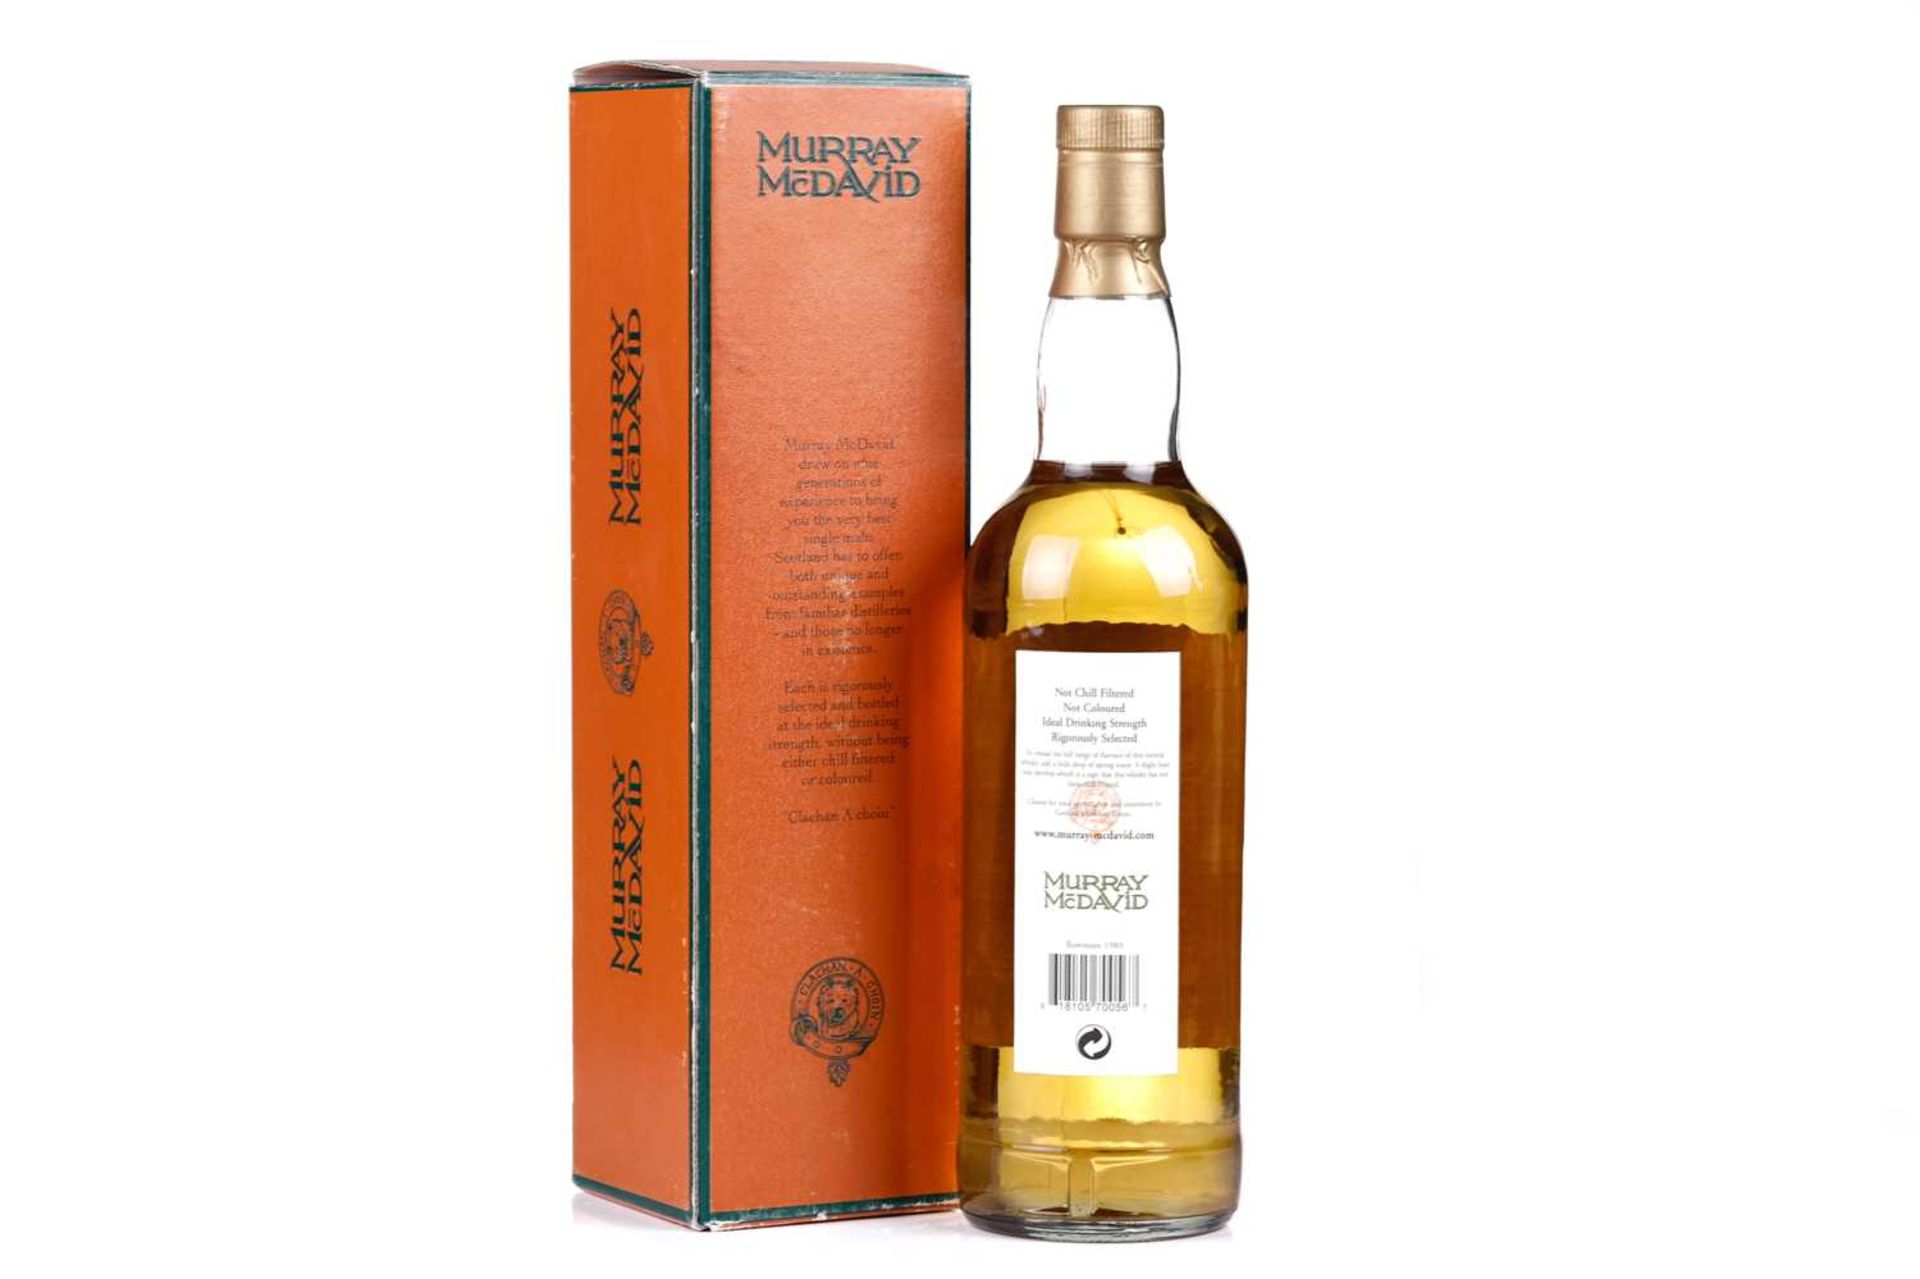 Murray McDavid Bowmore 1989, Scotch whisky, Cerbois 1972 Armagnac, boxed, Chateau Miraval 'Pink - Image 8 of 18